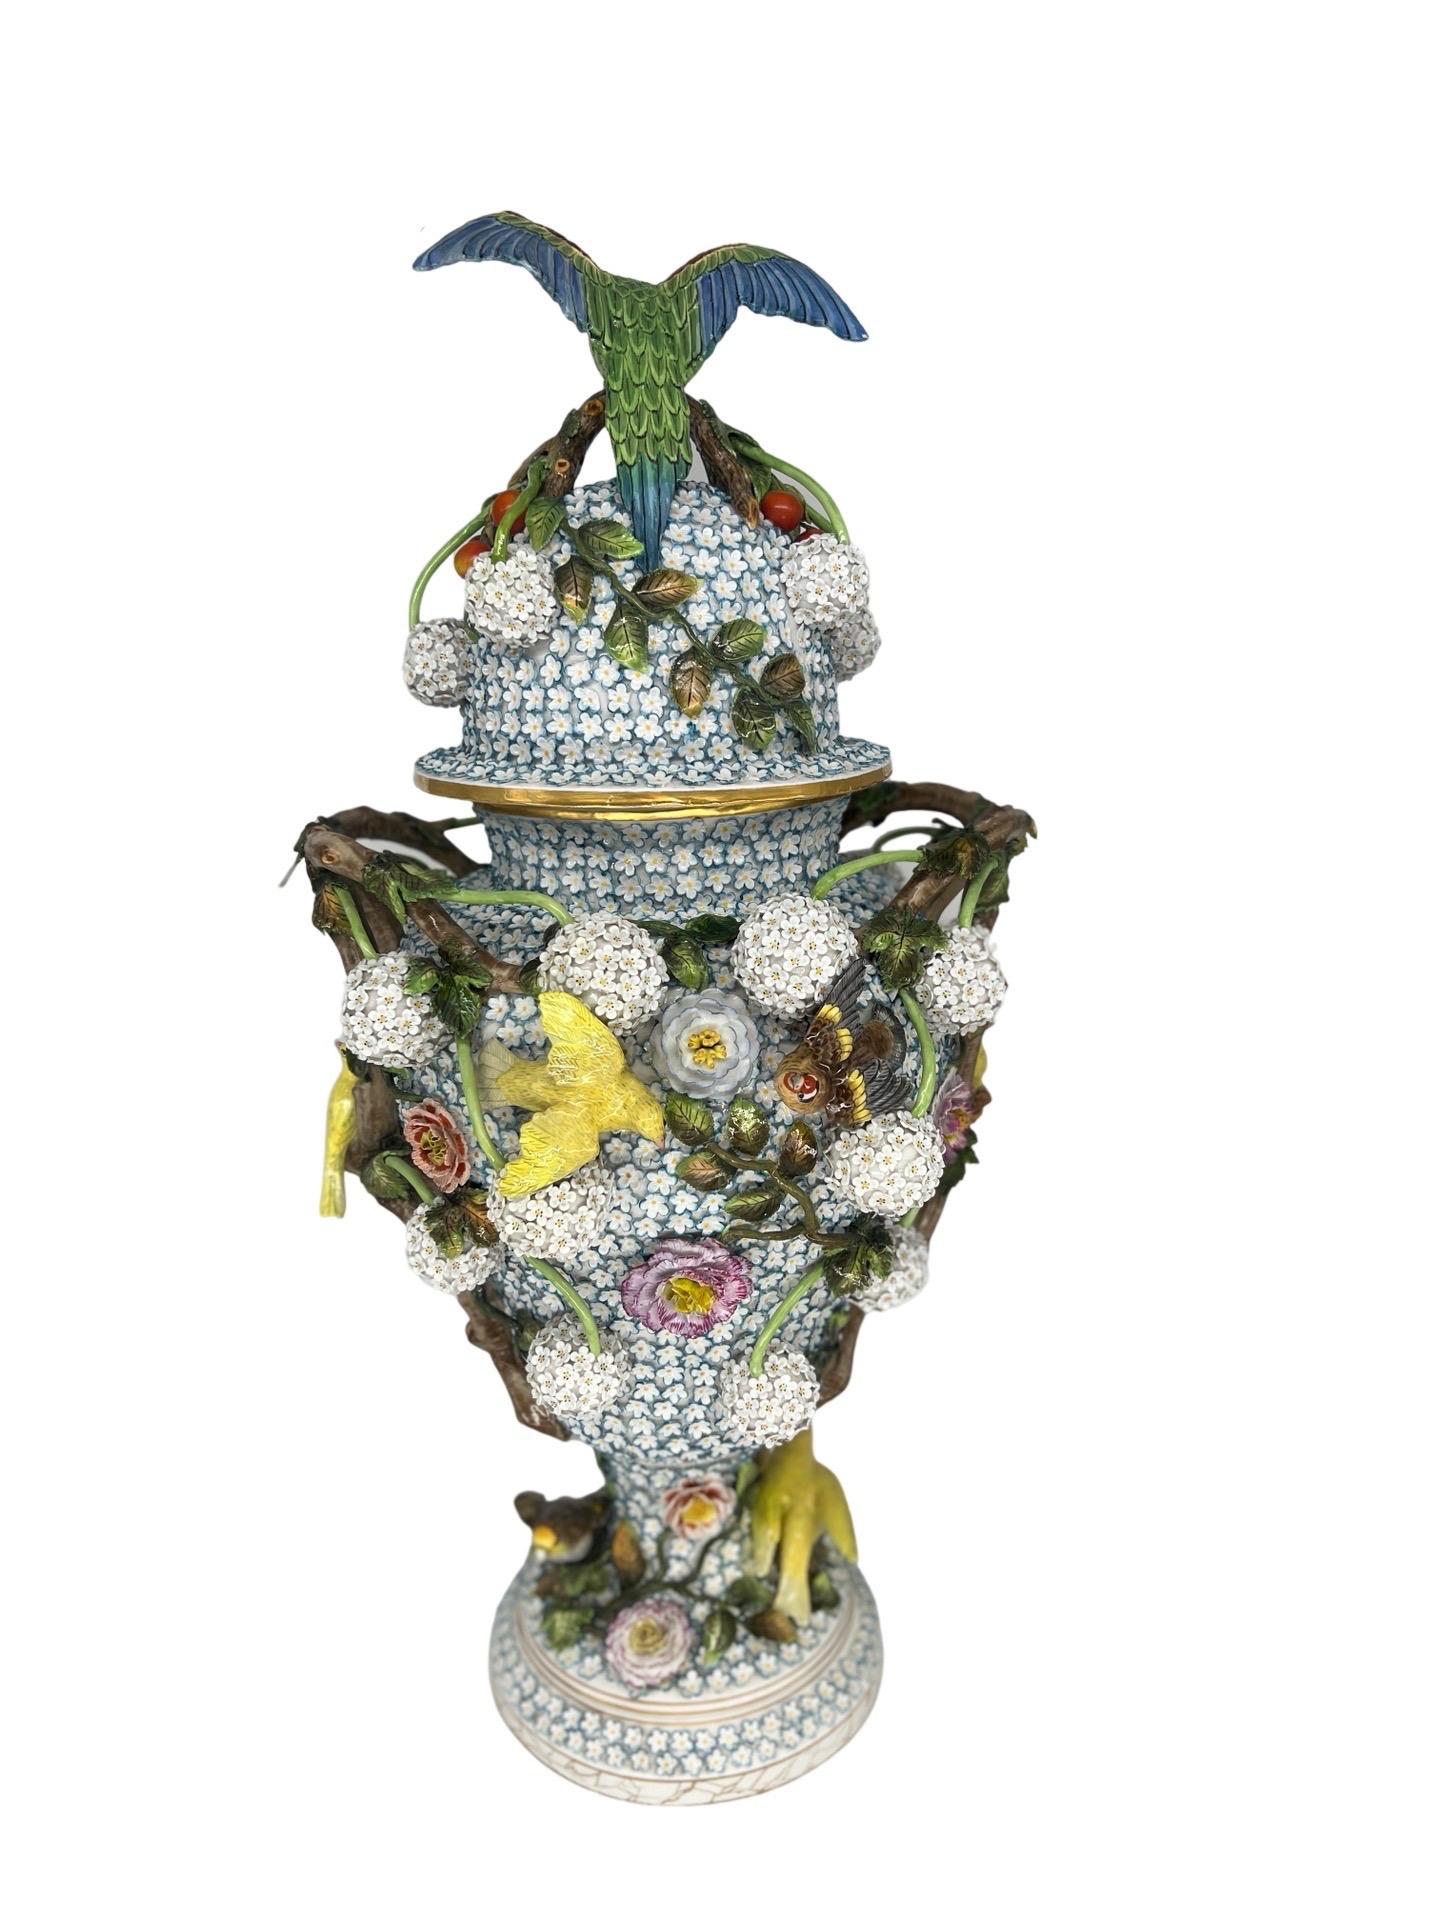 The monumental J.J. Kaendler 1780’s Meissen Schneeballen porcelain lidded urn with bird mounts is an exquisite and rare piece of art that embodies the craftsmanship and beauty of the Meissen porcelain tradition. Standing tall and proud, this urn